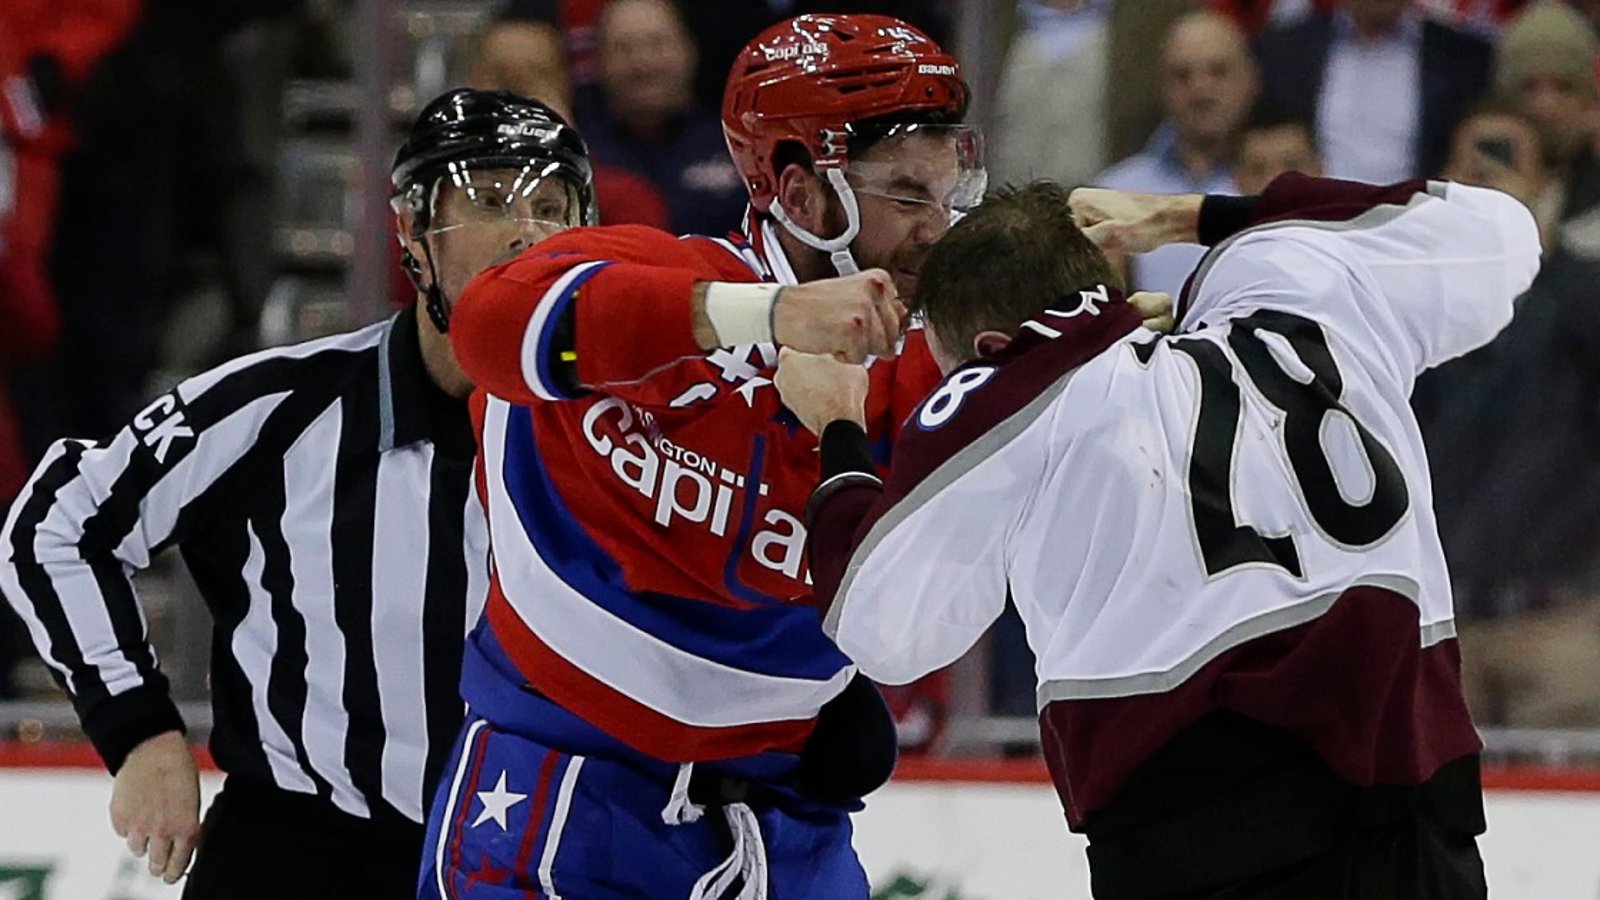 Veteran defenseman out 'indefinitely' after vicious beatdown from Tom Wilson.